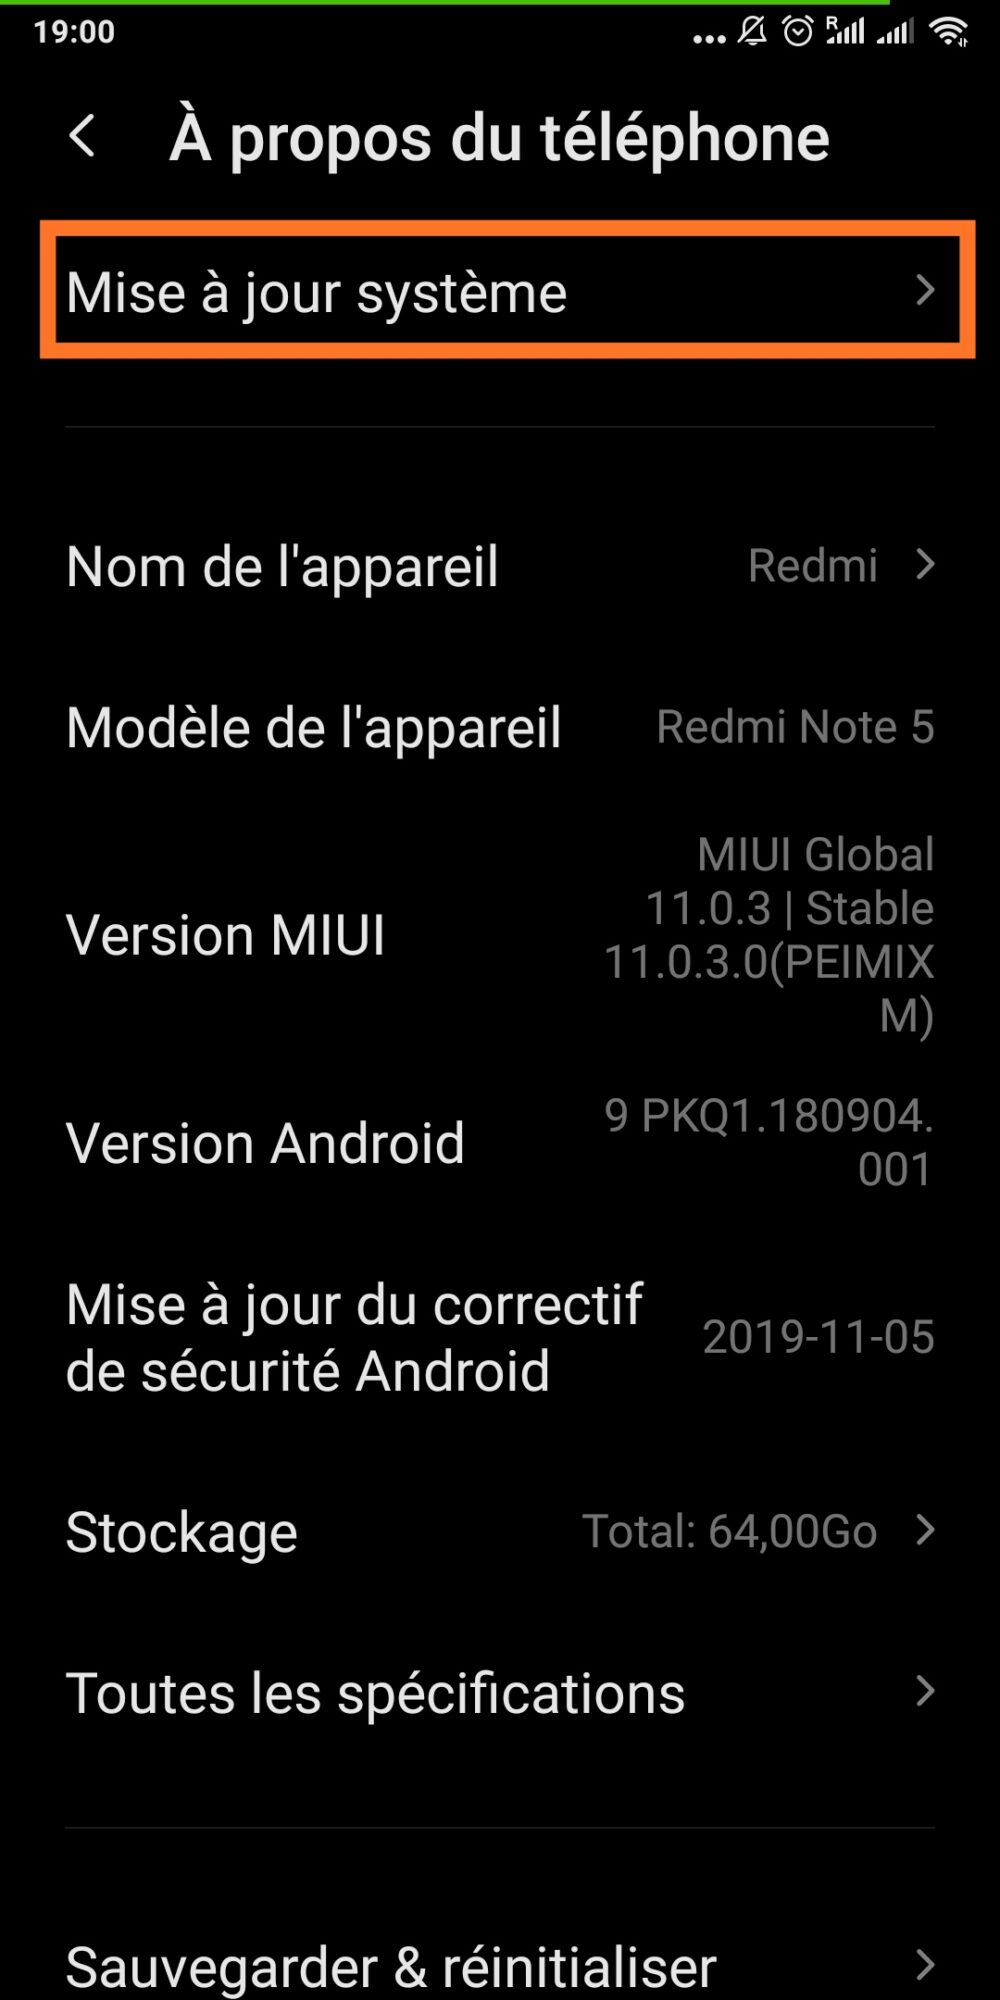 mise-a-jour-systeme-android-xiaomi